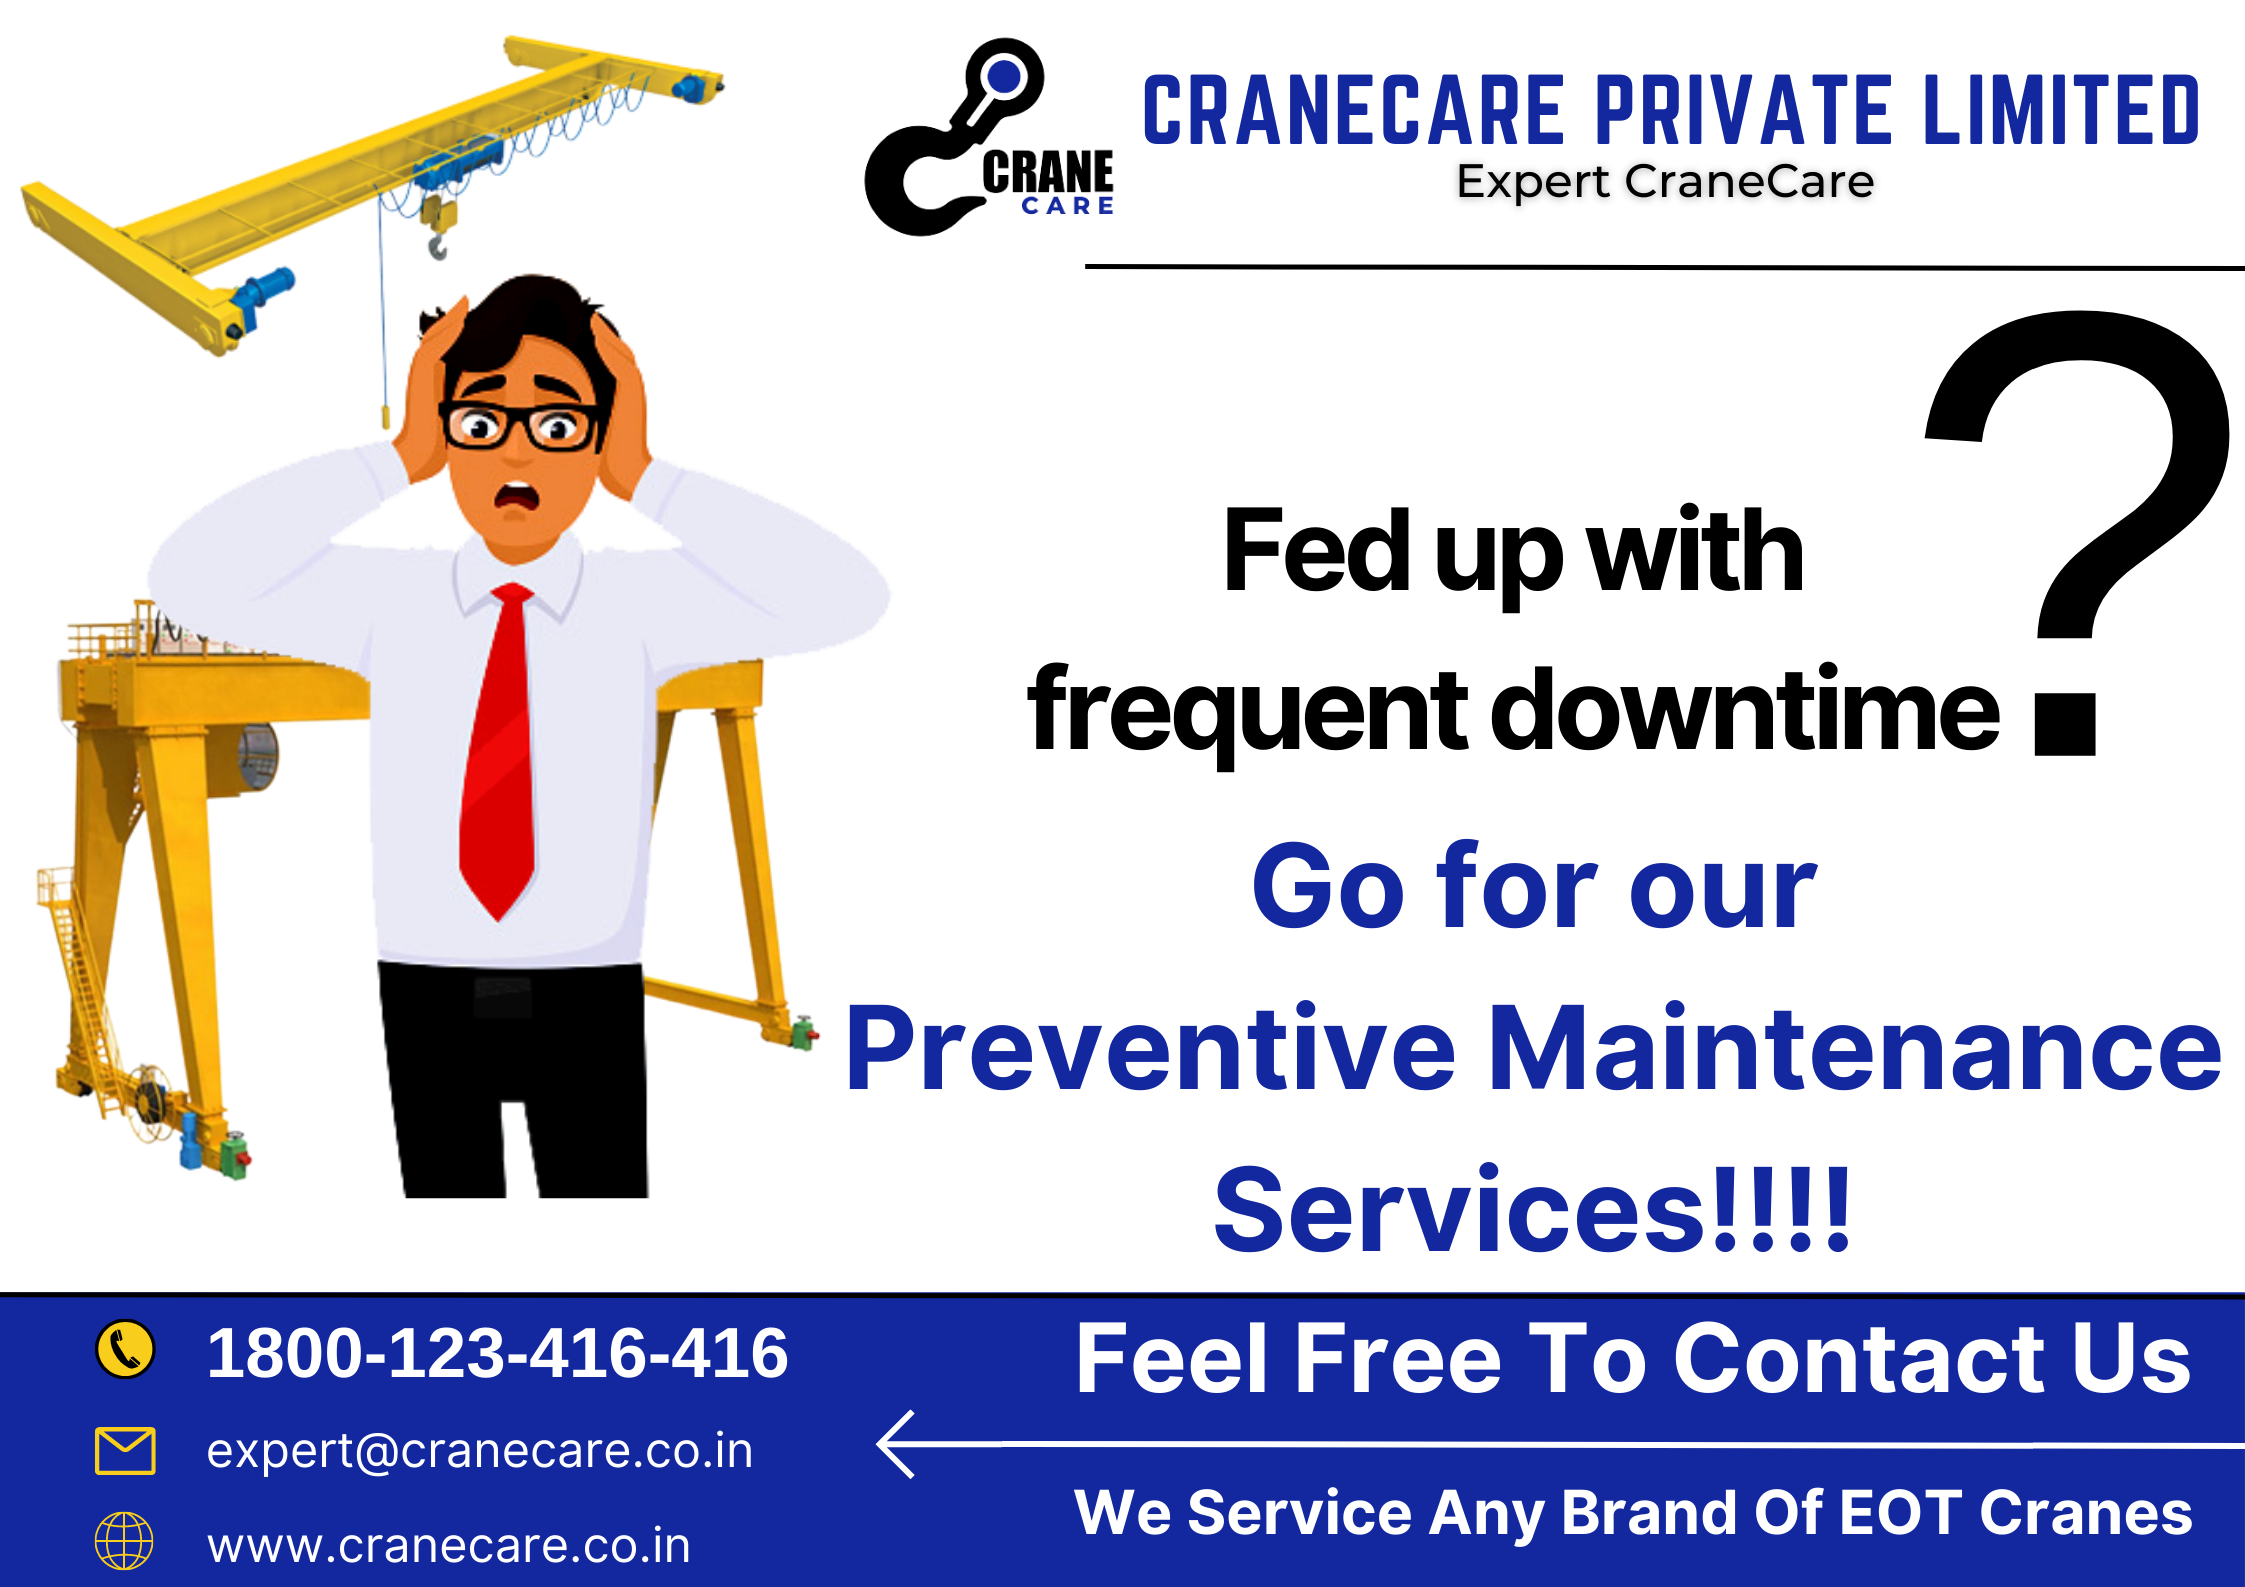 Fed up with frequent downtime?